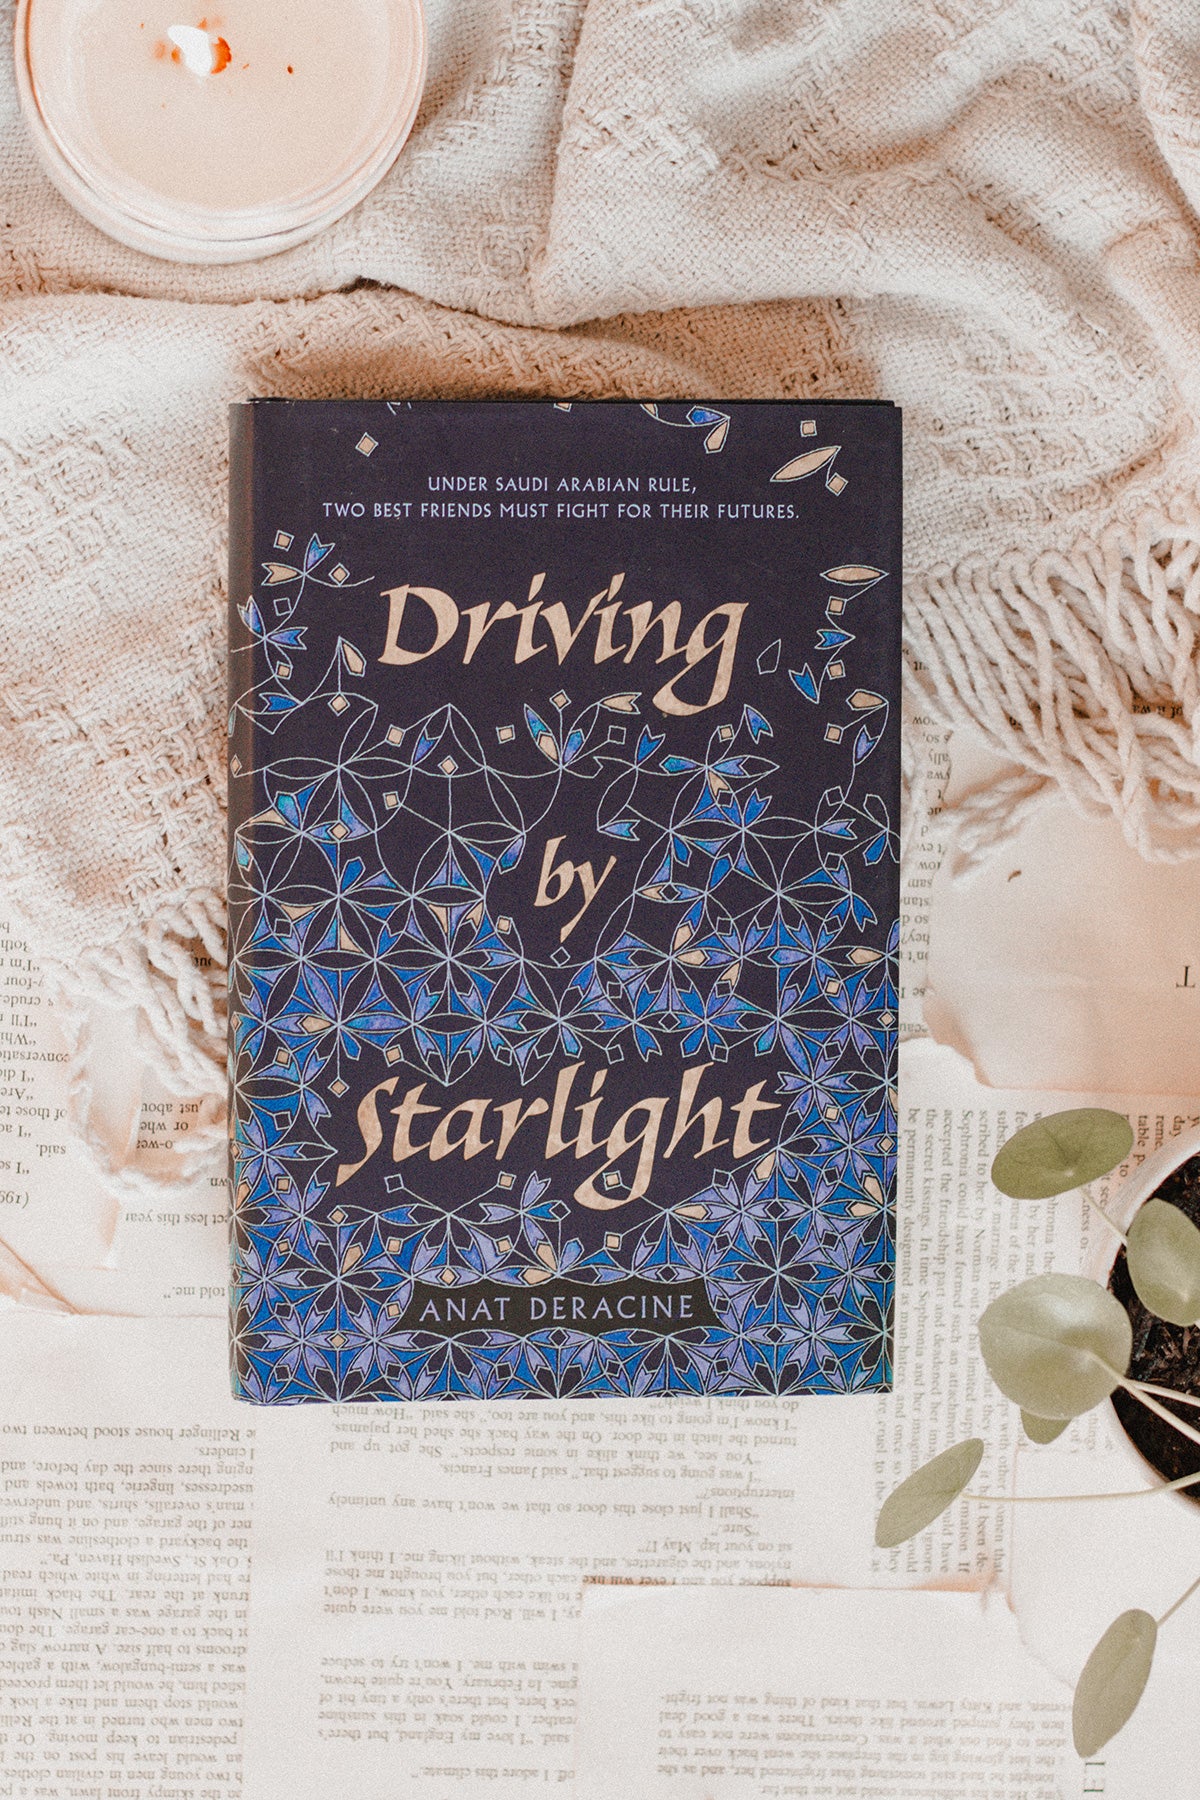 Driving by Starlight by Anat Deracine